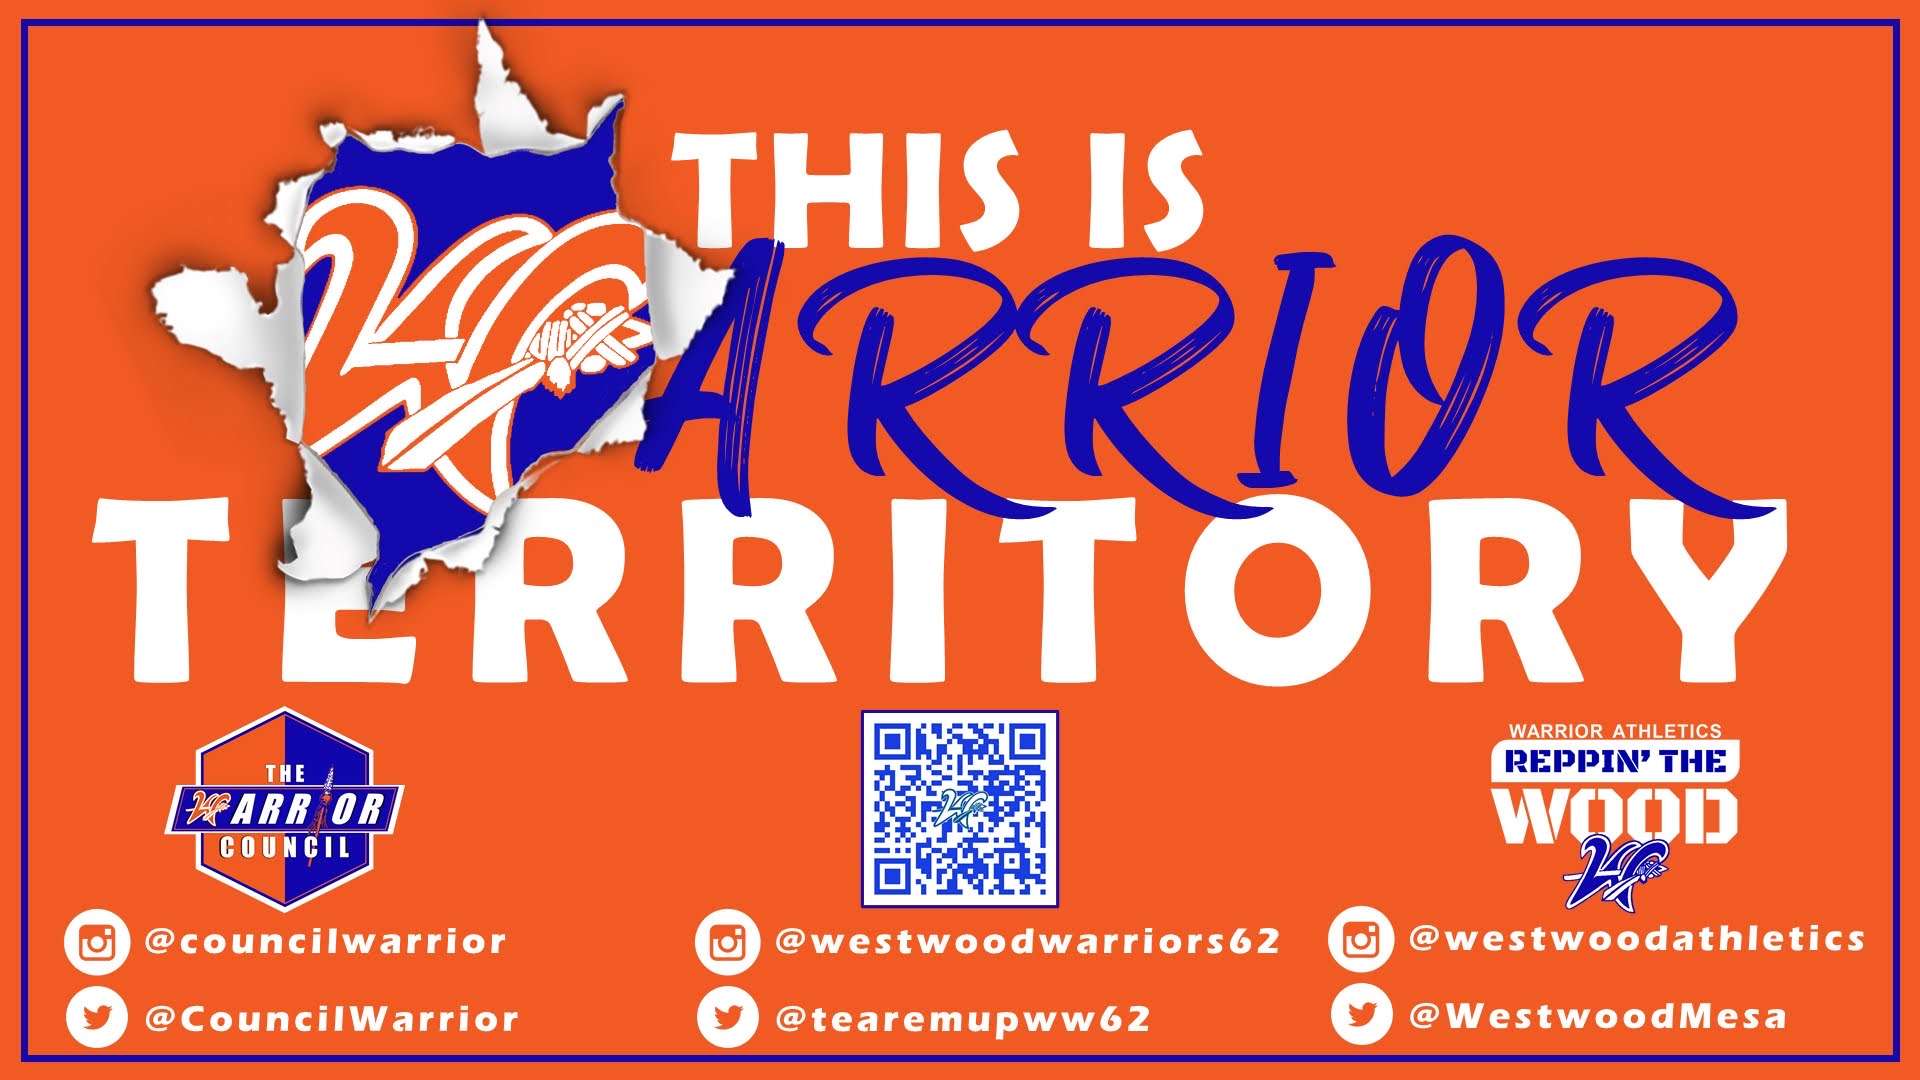 this is warrior territory social media